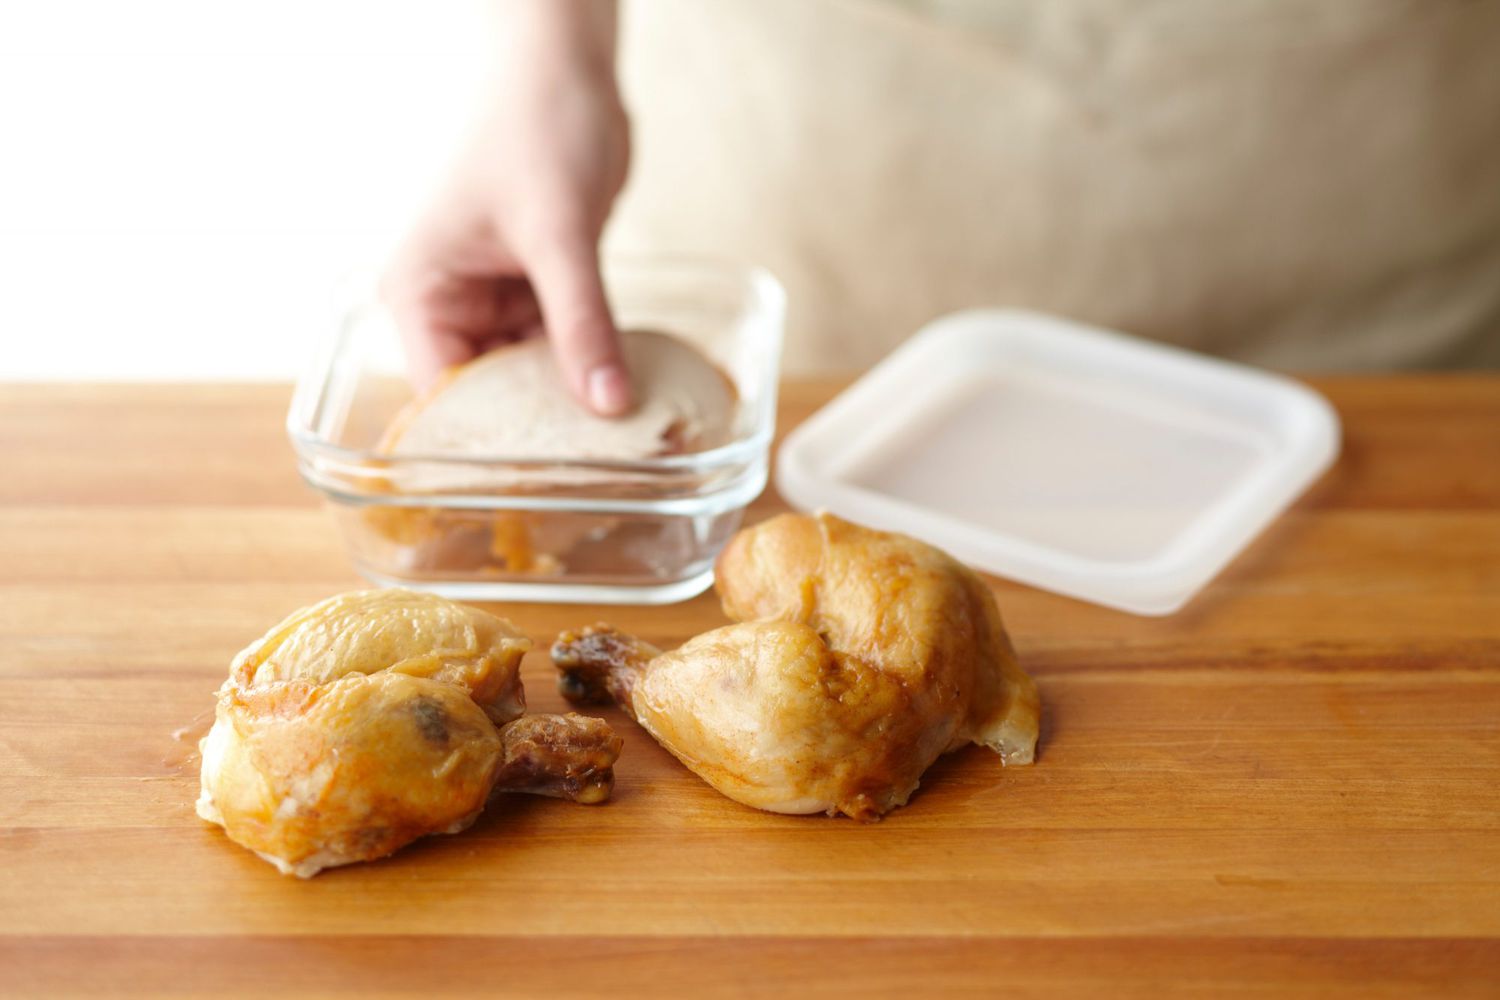 How To Store Cooked Chicken In Freezer